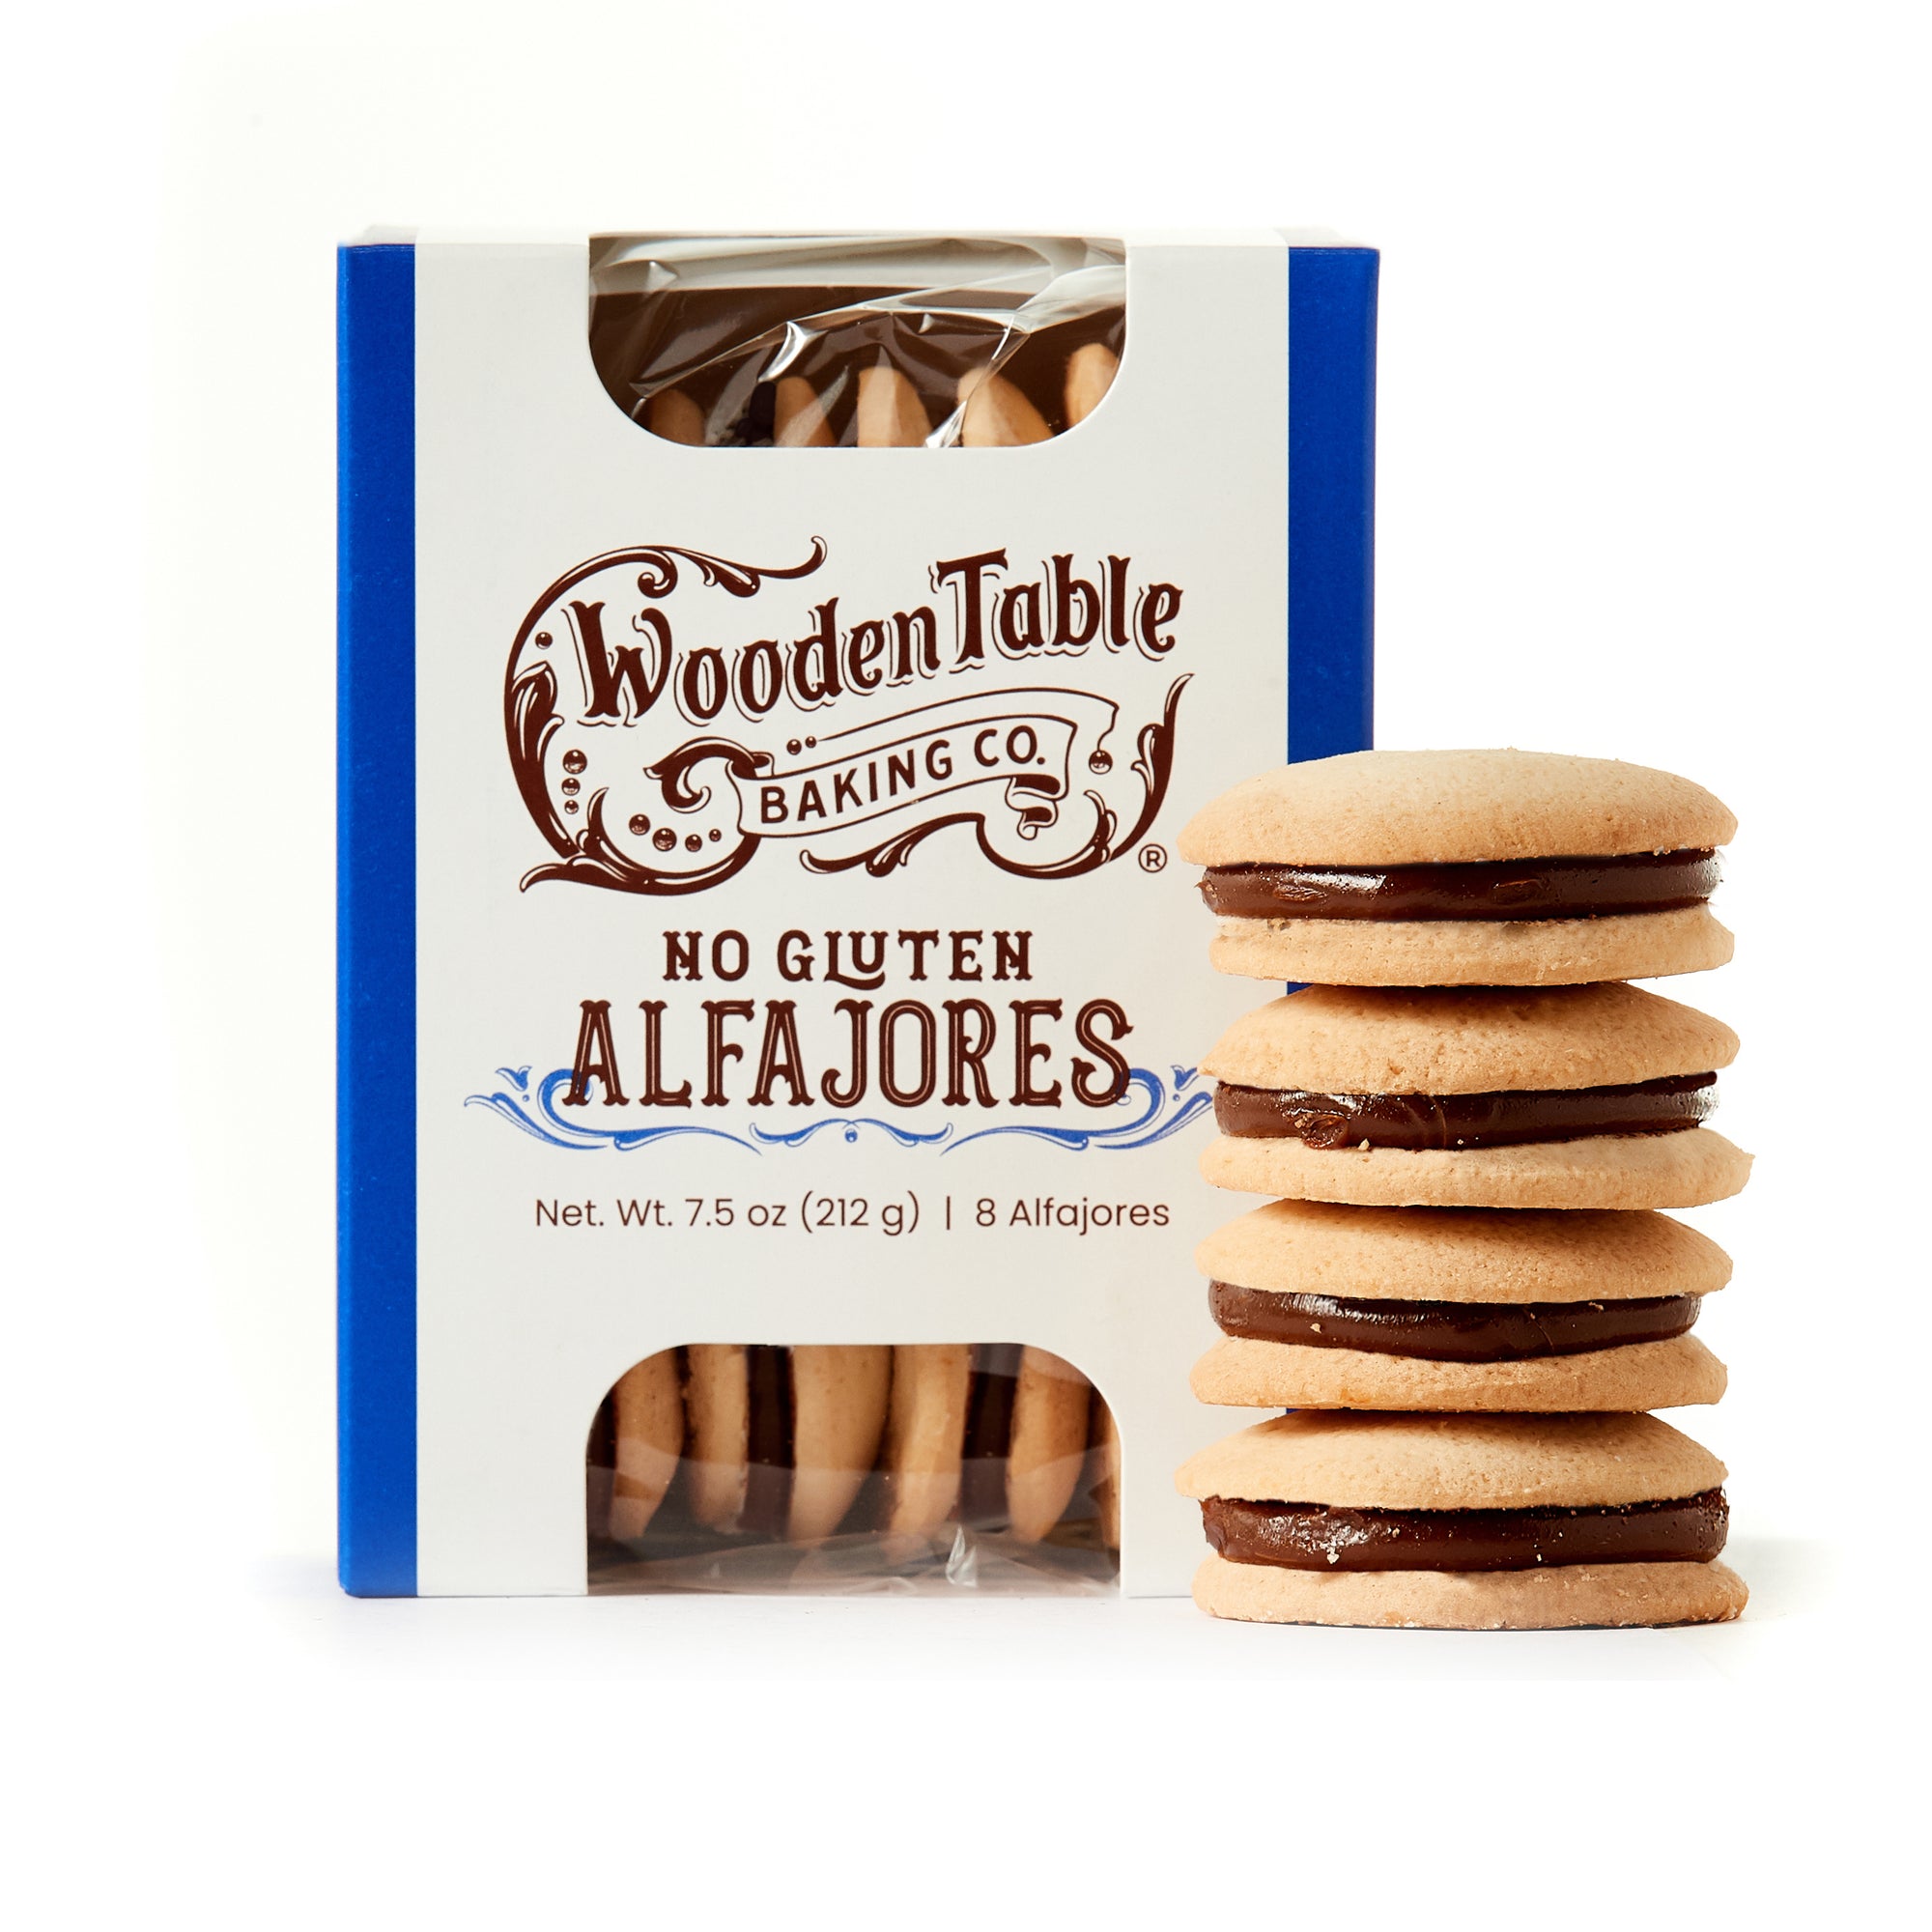  4 Traditional Gluten Free Alfajores in Packaging from Wooden Table Baking Company